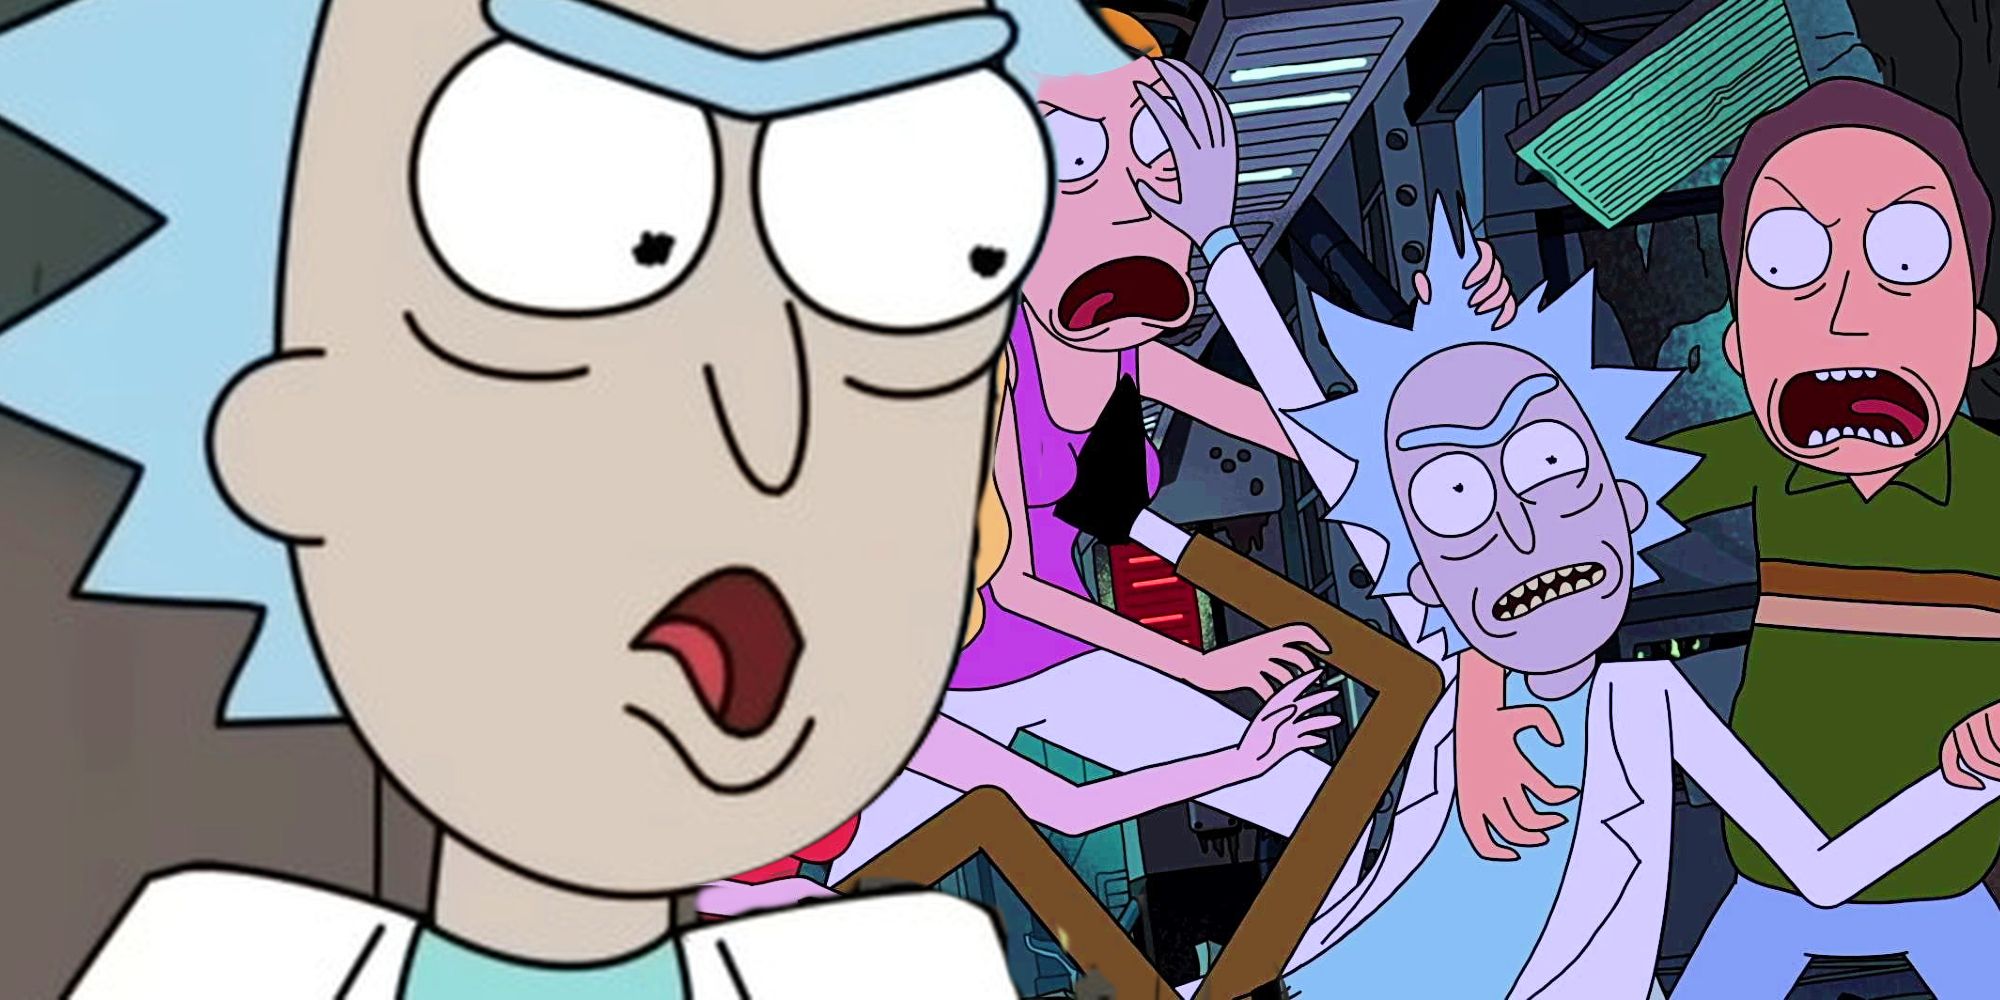 Rick and the Smiths in Rick and Morty